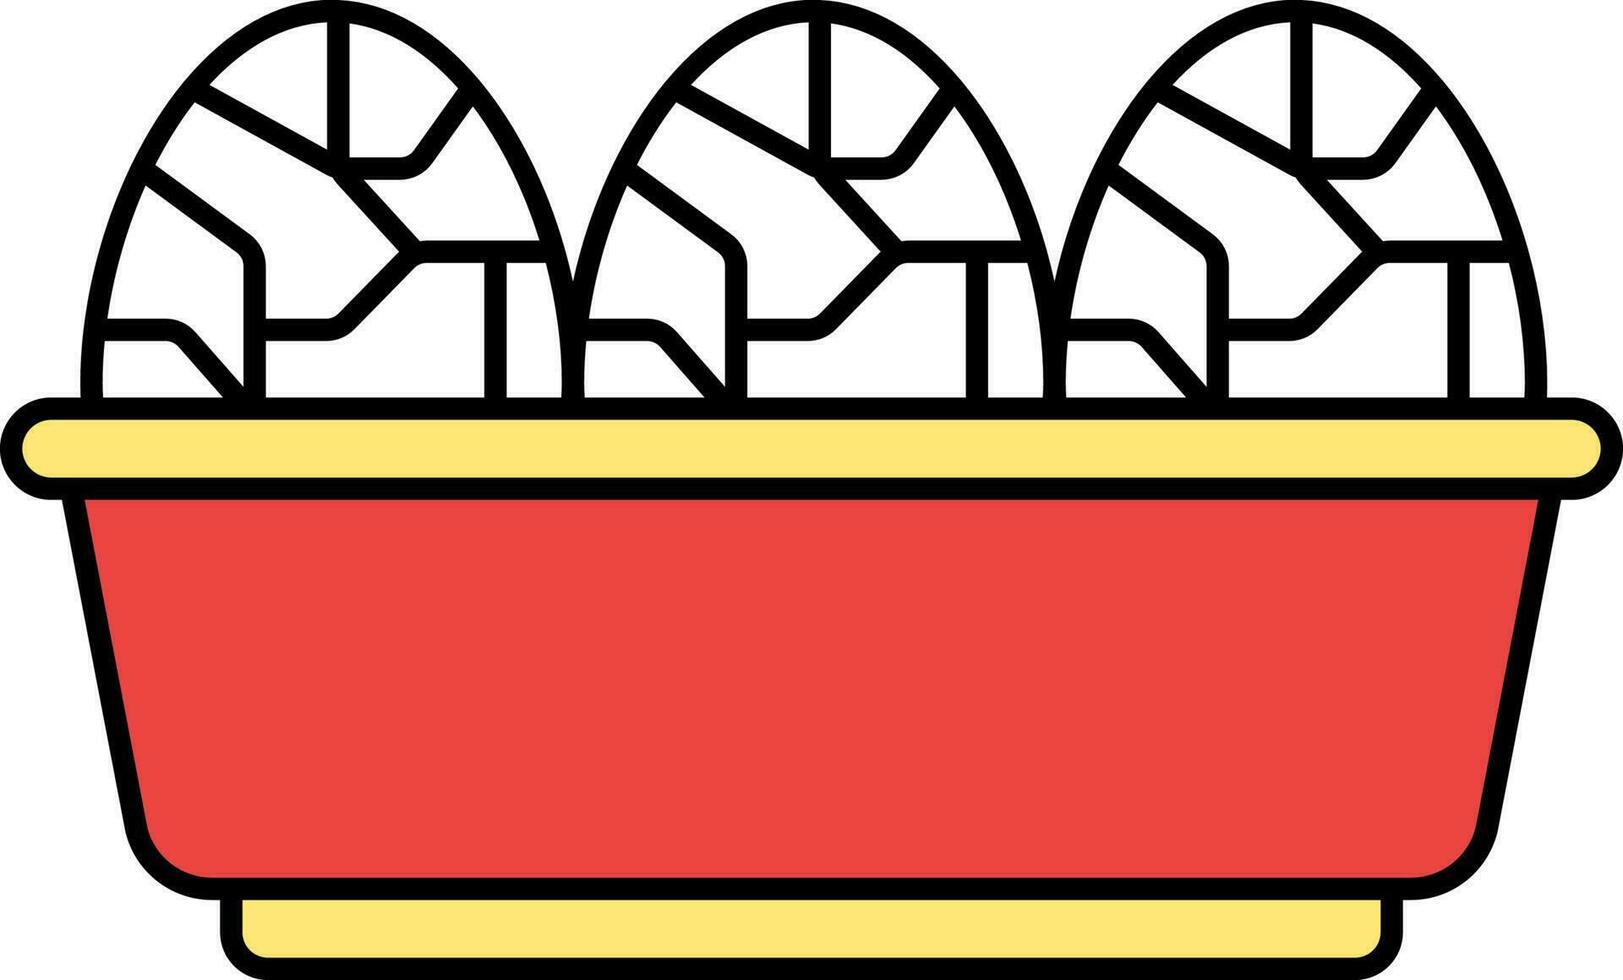 Flat Style Tea Eggs Bowl Red And Yellow Icon. vector